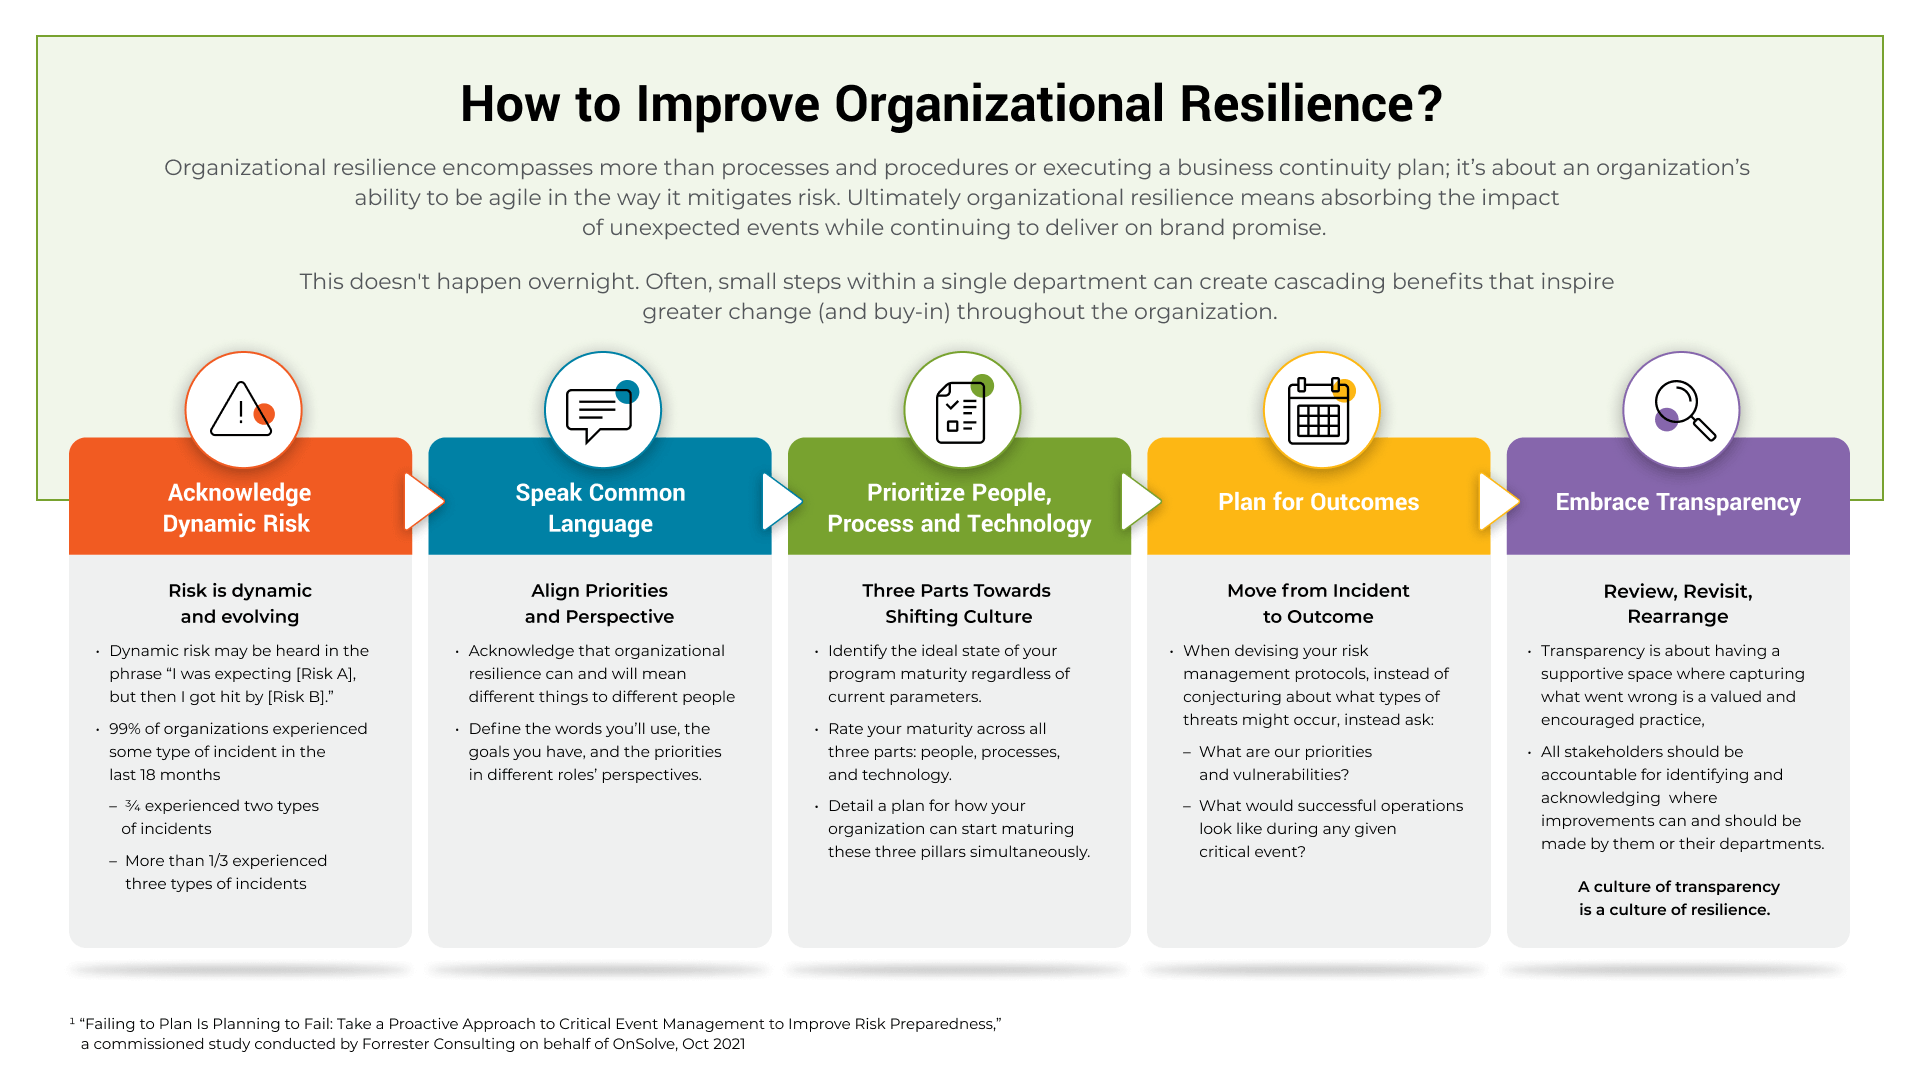 How to Improve Organizational Resilience